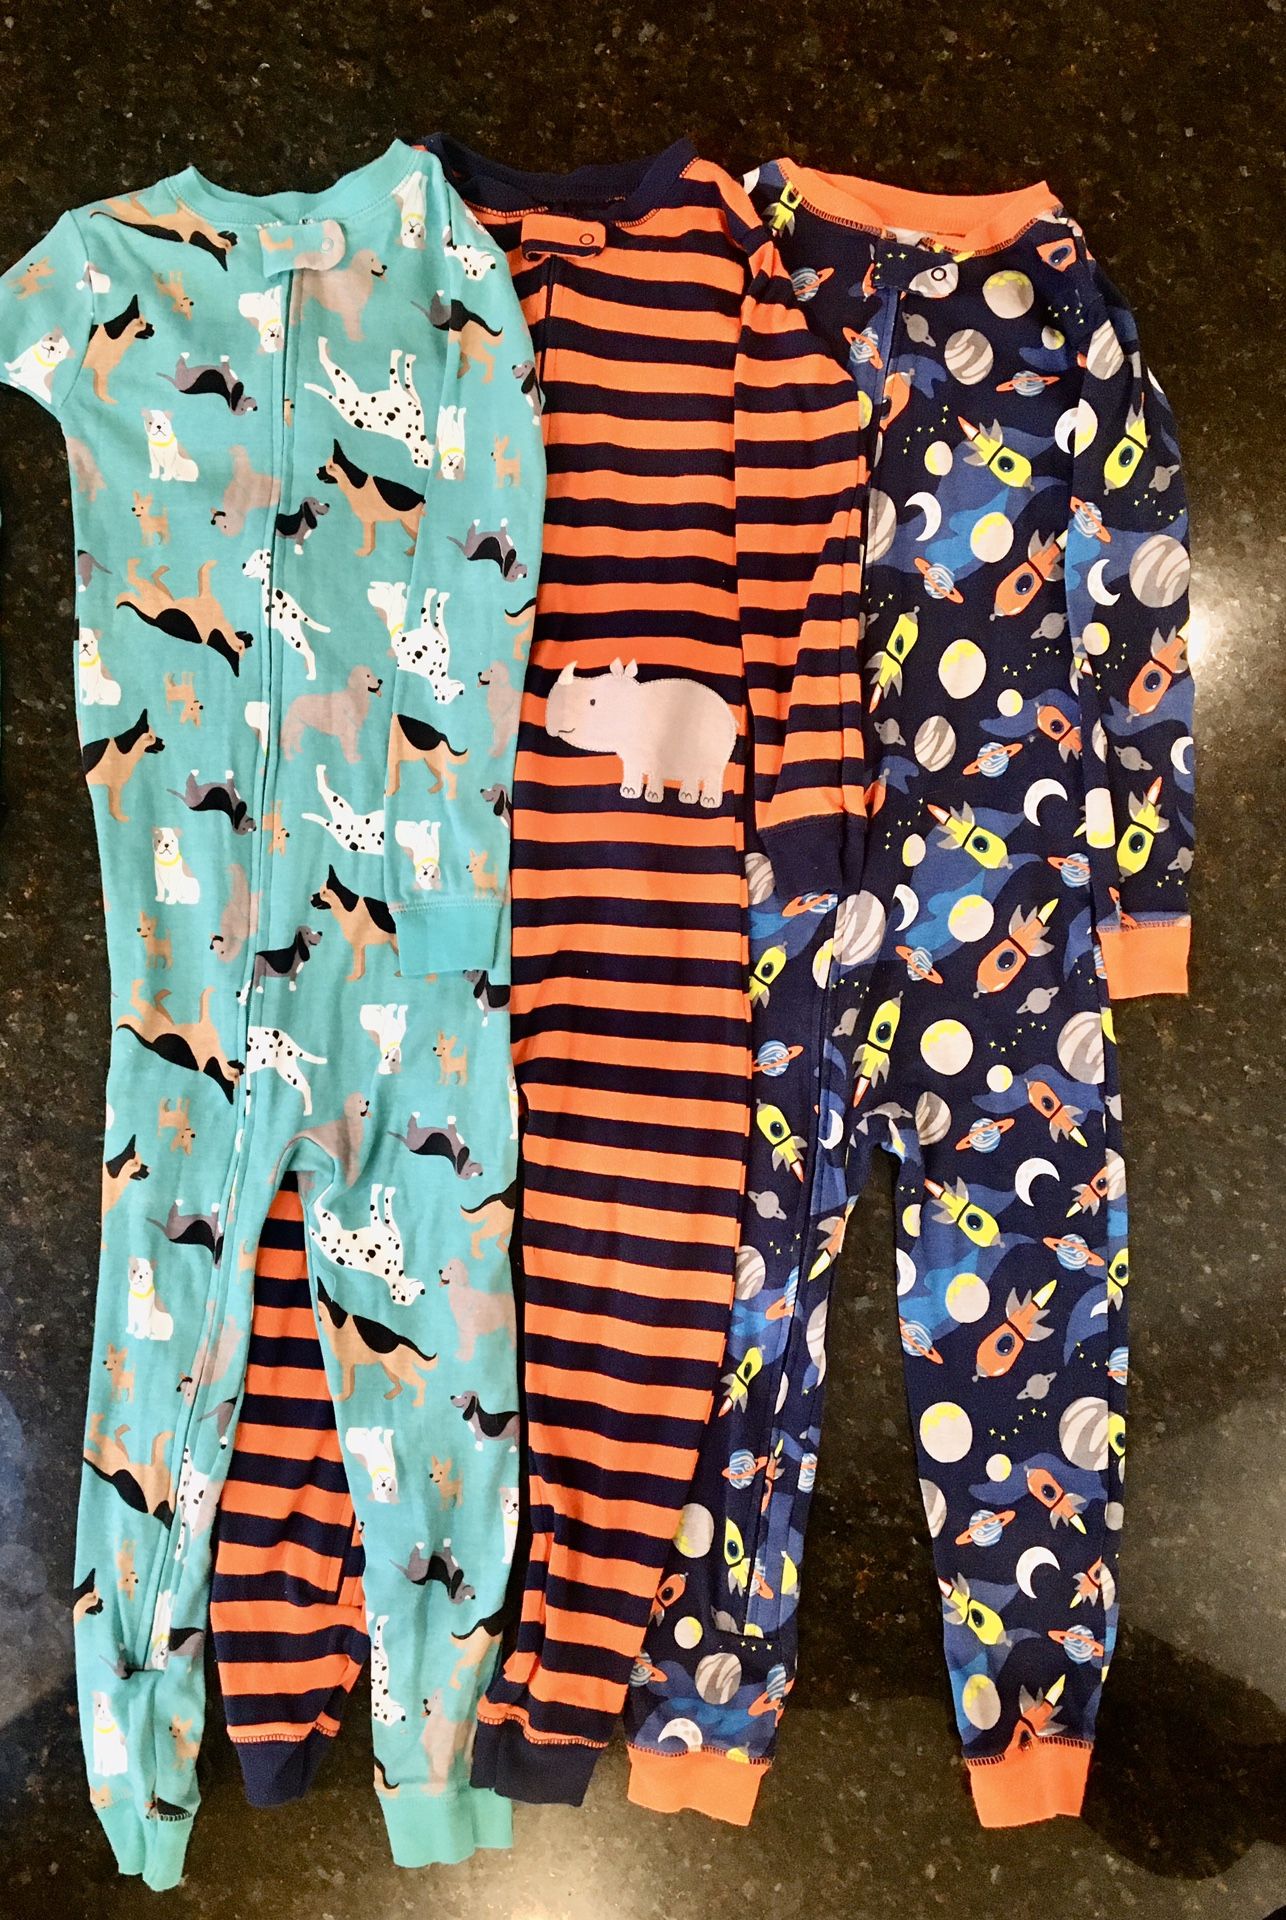 Three Carter’s cotton open-footed onesies, 5T